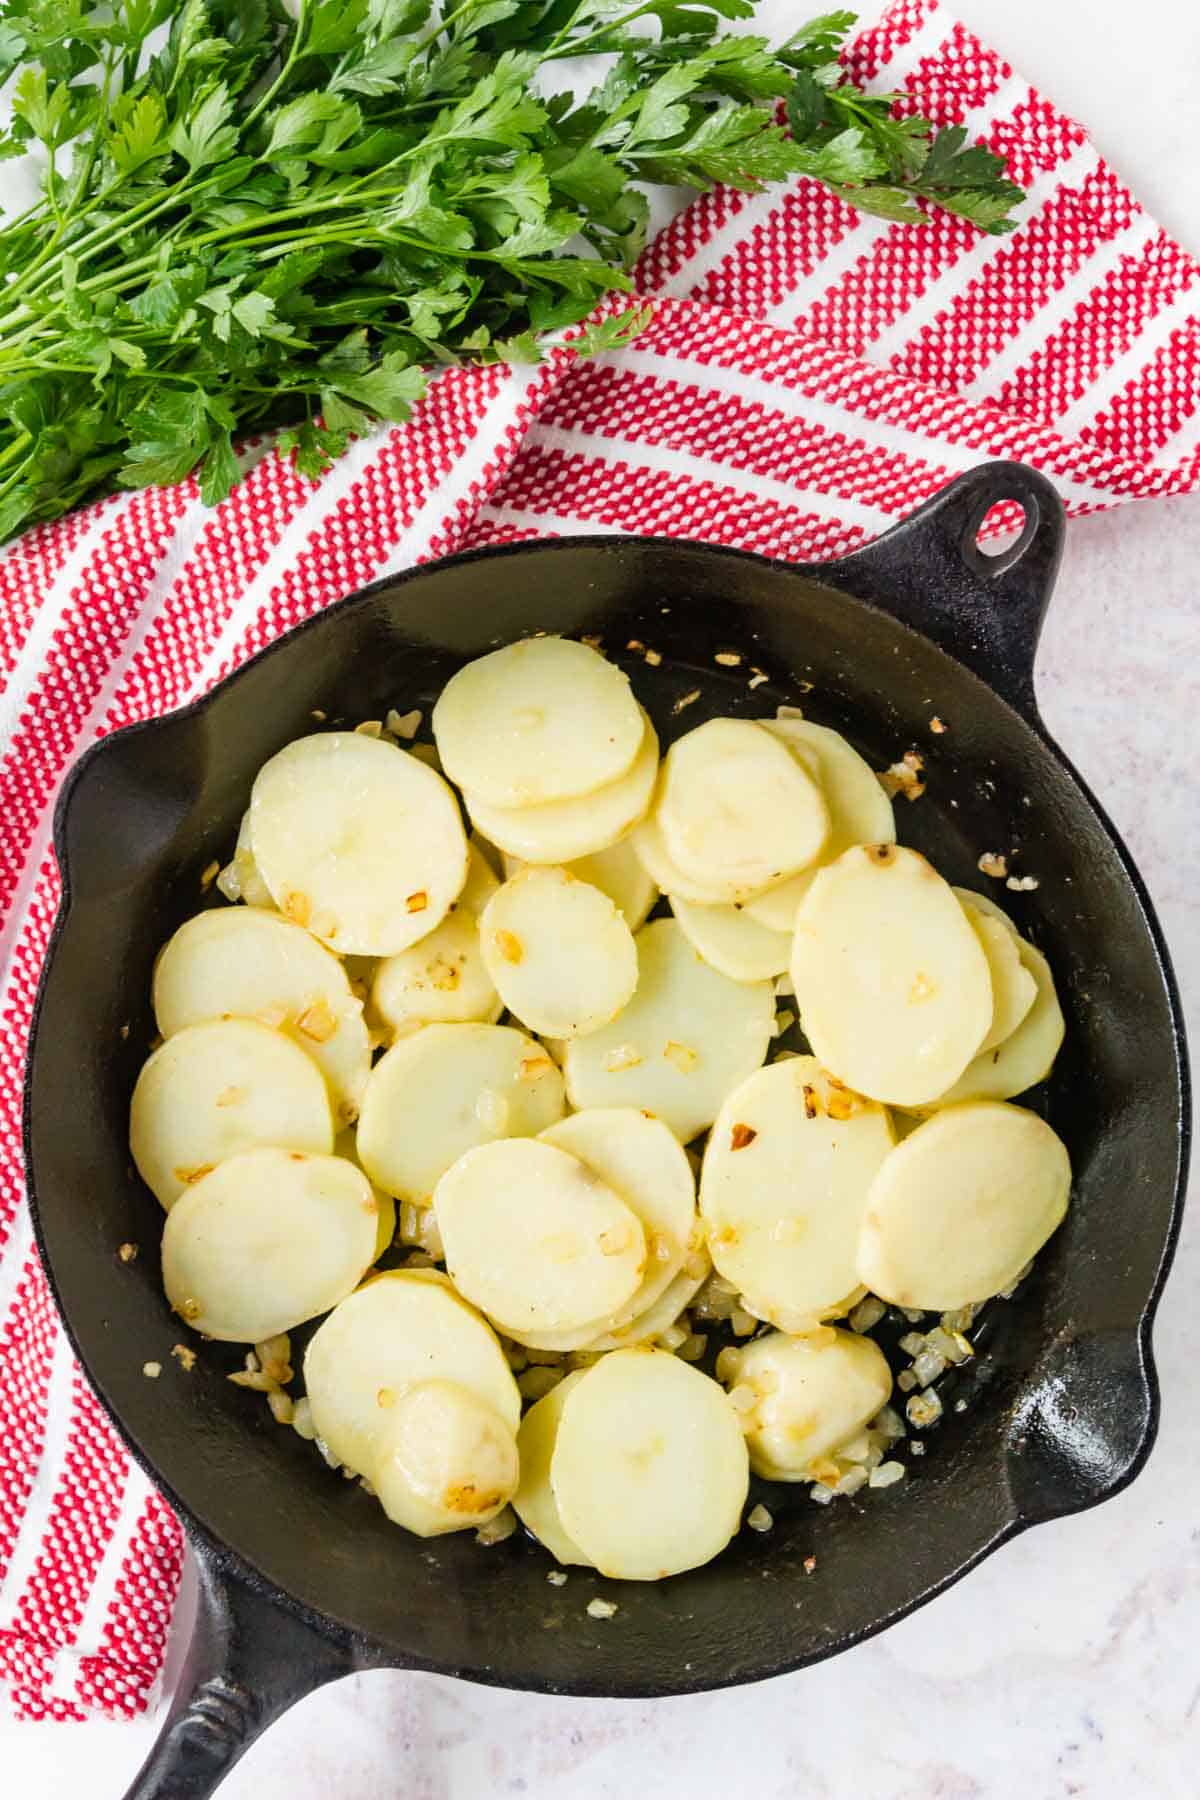 Sauteed sliced potatoes and chopped onions in a cast iron pan.